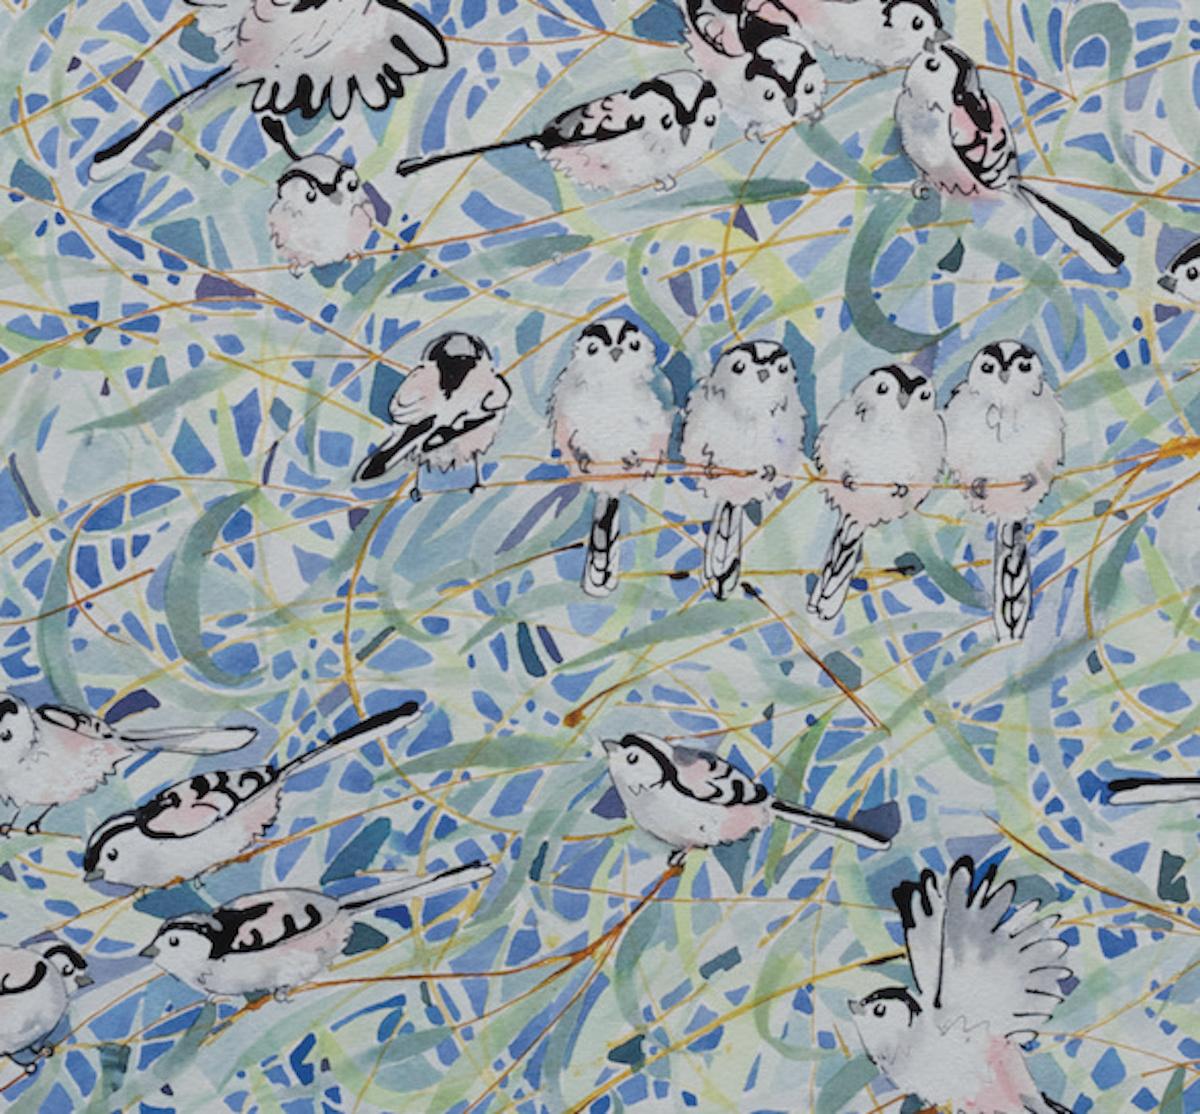 Long Tailed Tits in the Willow Mixed Media Painting by Nicola Wiehahn [2022] For Sale 5